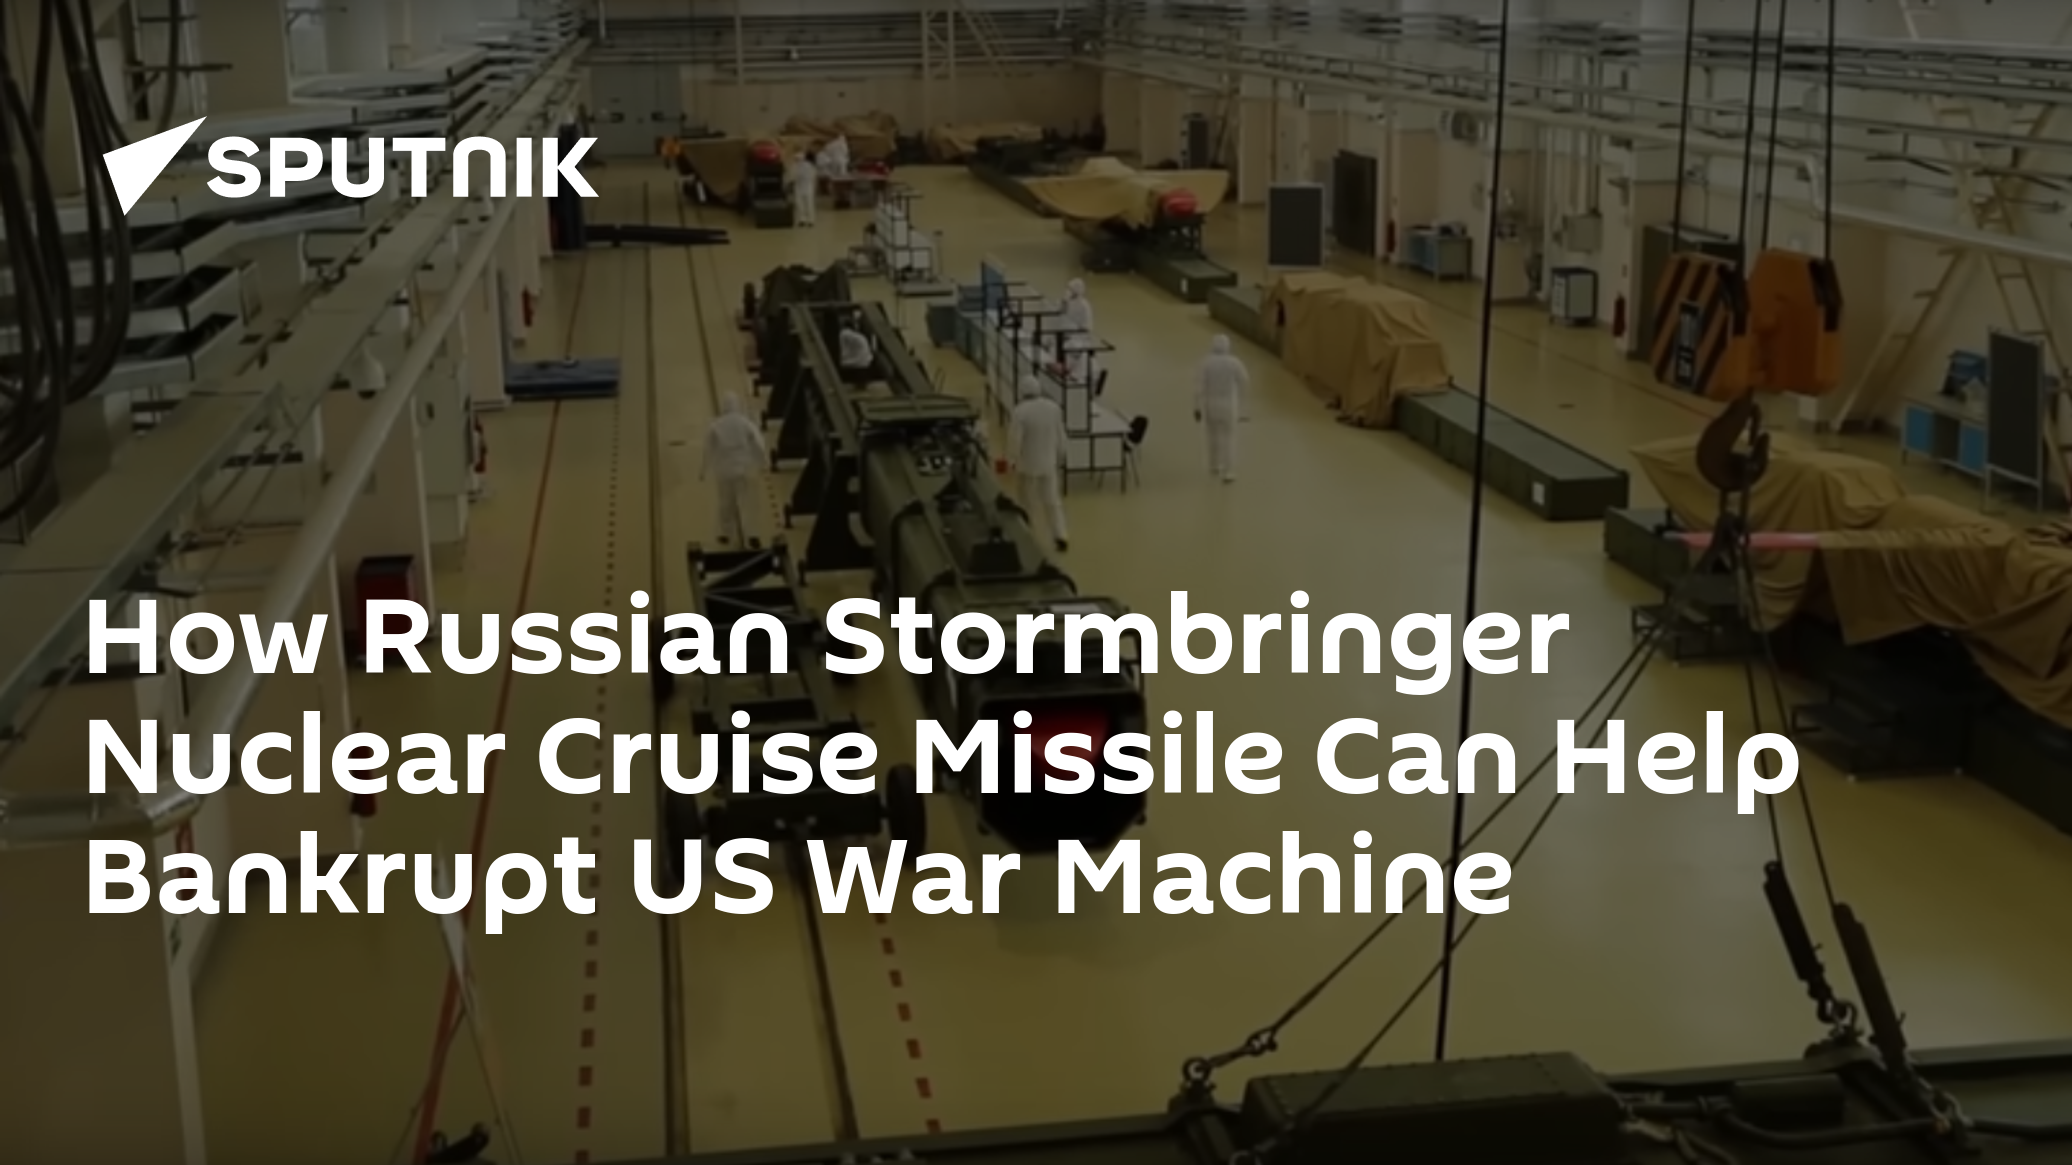 How Russian Stormbringer Nuclear Cruise Missile Can Help Bankrupt US War Machine